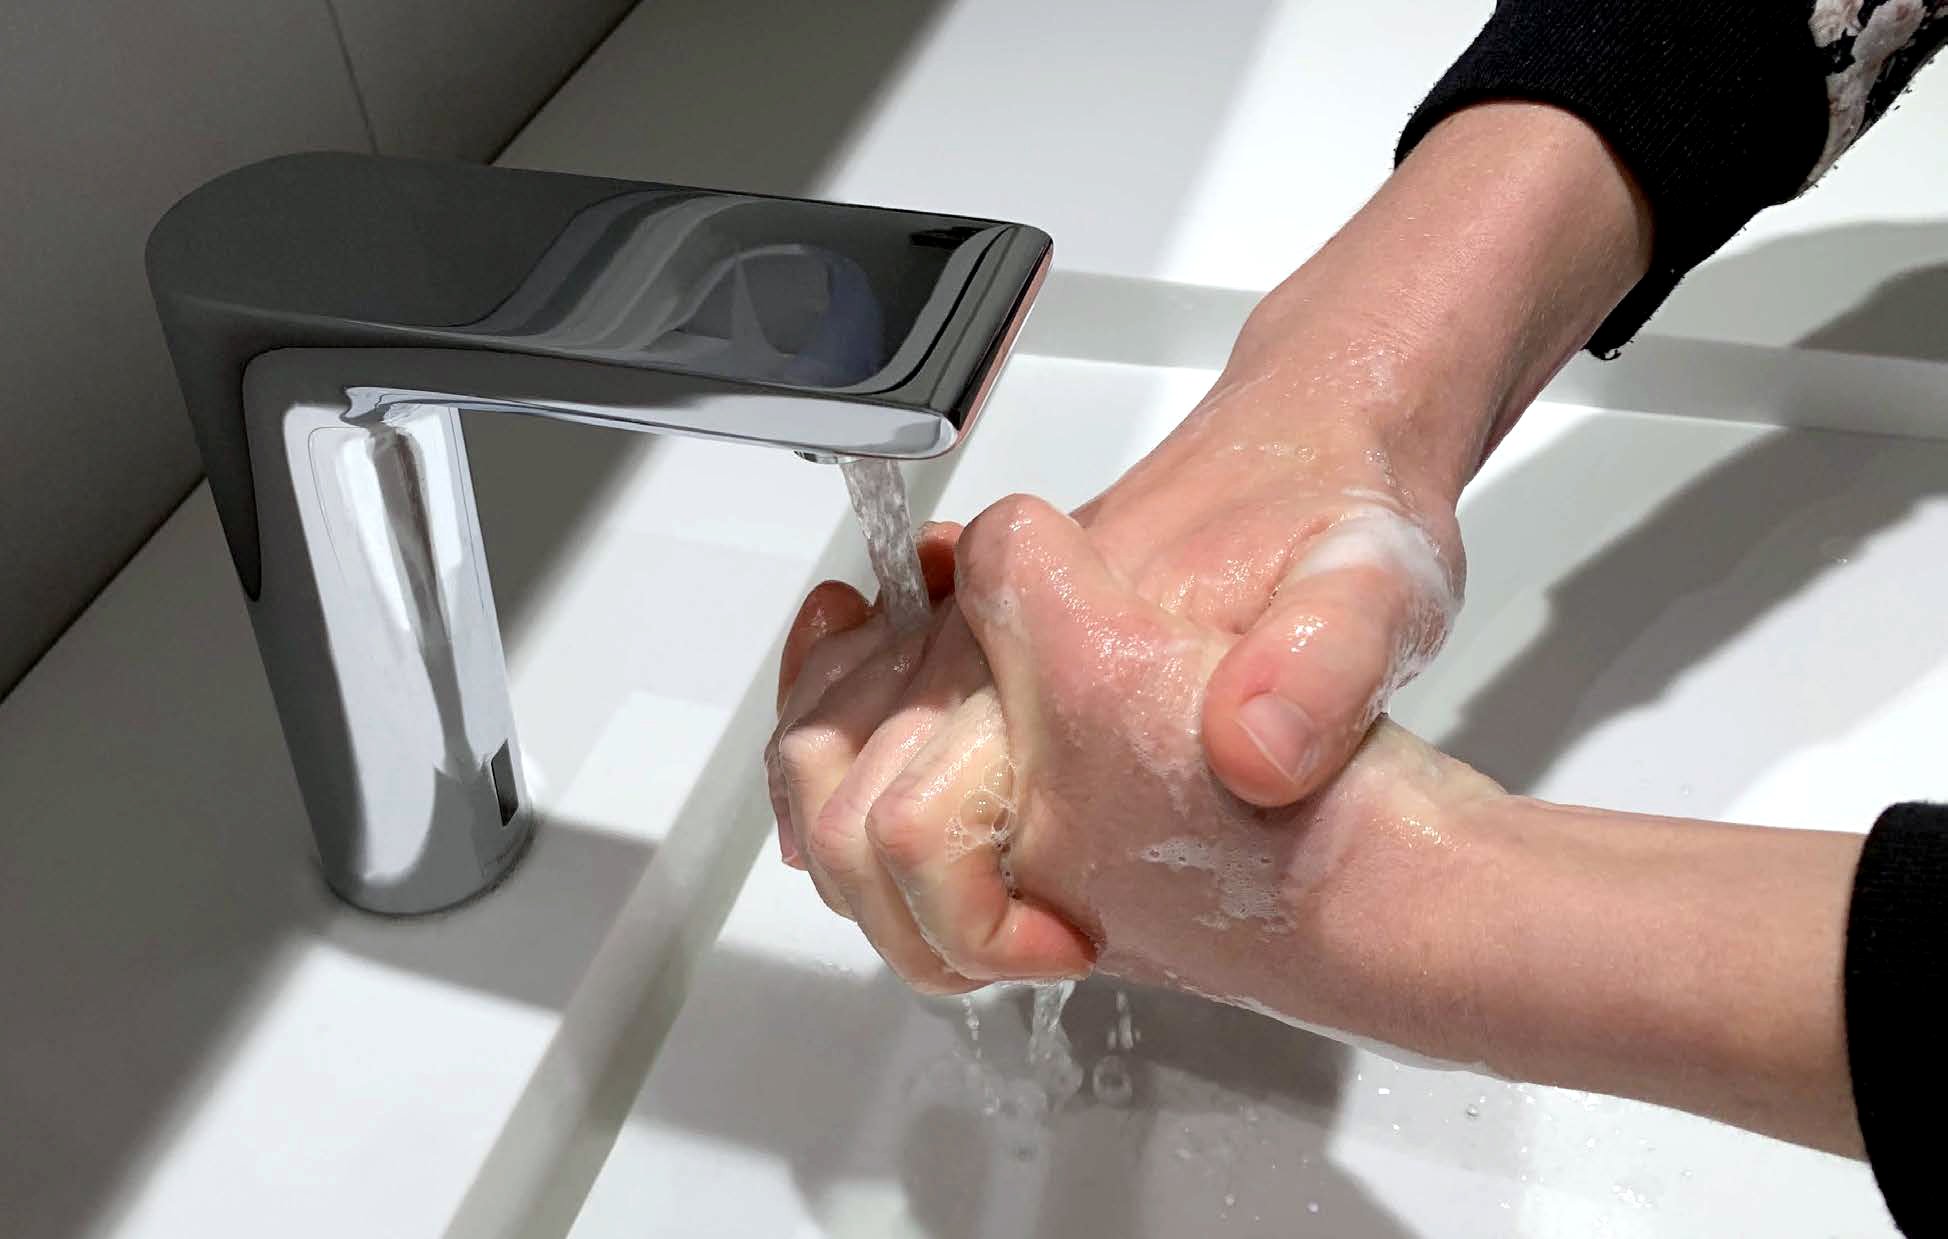 Hands under a water tap